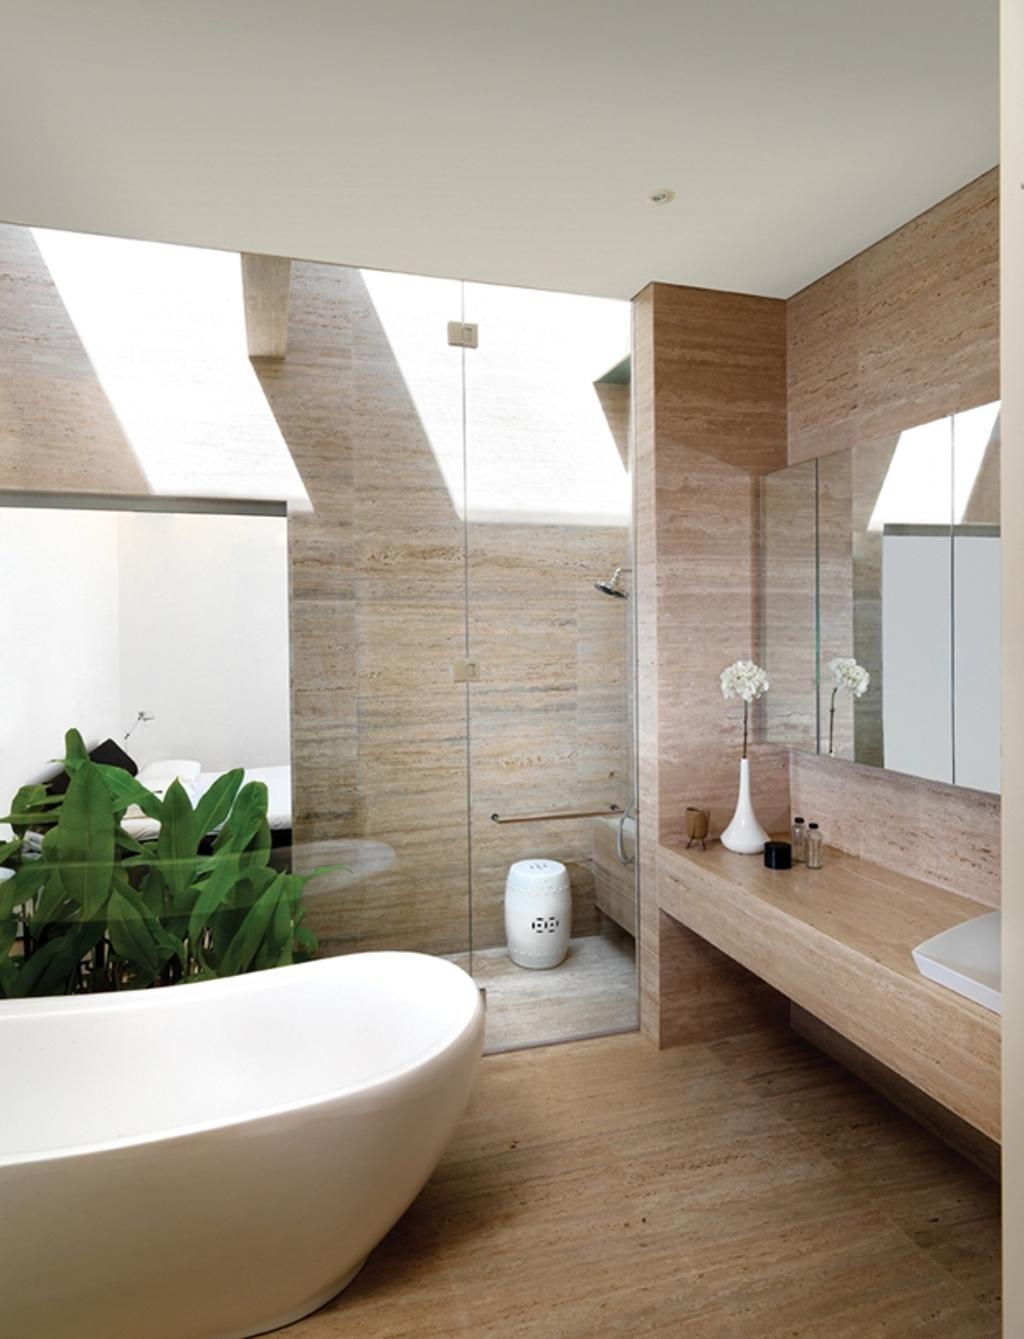 Modern, Landed, Ontario, Architect, Ministry of Design, White Ceiling, White Bathtub, Plant, Potted Plants, Brown Floor, Wooden Flooring, Wooden Wall, Mirror Cabinet, Wall Mounted Cabinet, White Sink, Glass Shower Doors, Flora, Jar, Potted Plant, Pottery, Vase, Indoors, Interior Design